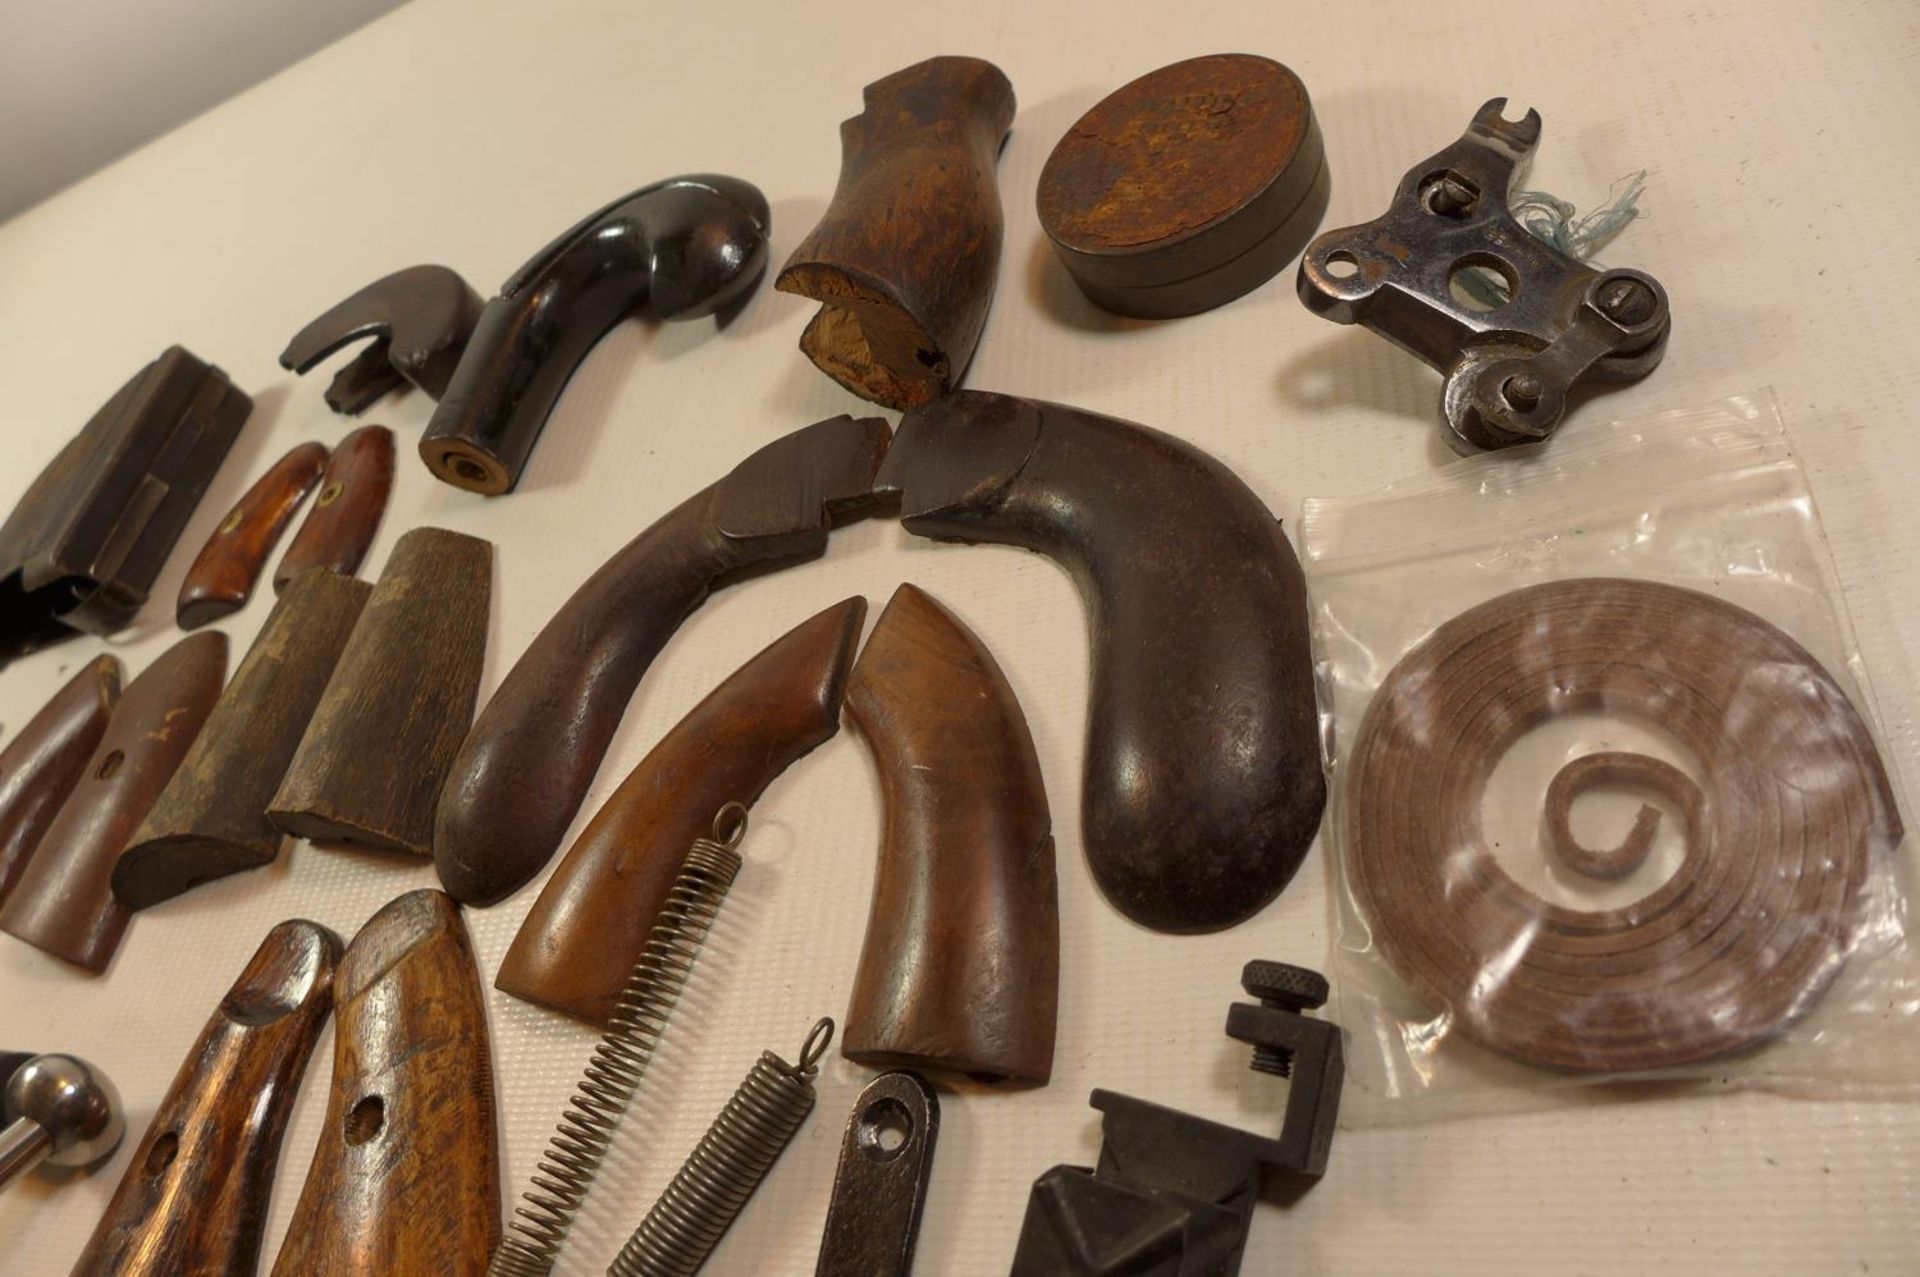 A COLLECTION OF GUN PARTS, TO INCLUDE SETS OF WOODEN GRIPS, MAGAZINES,SPRINGS ETC - Image 3 of 8